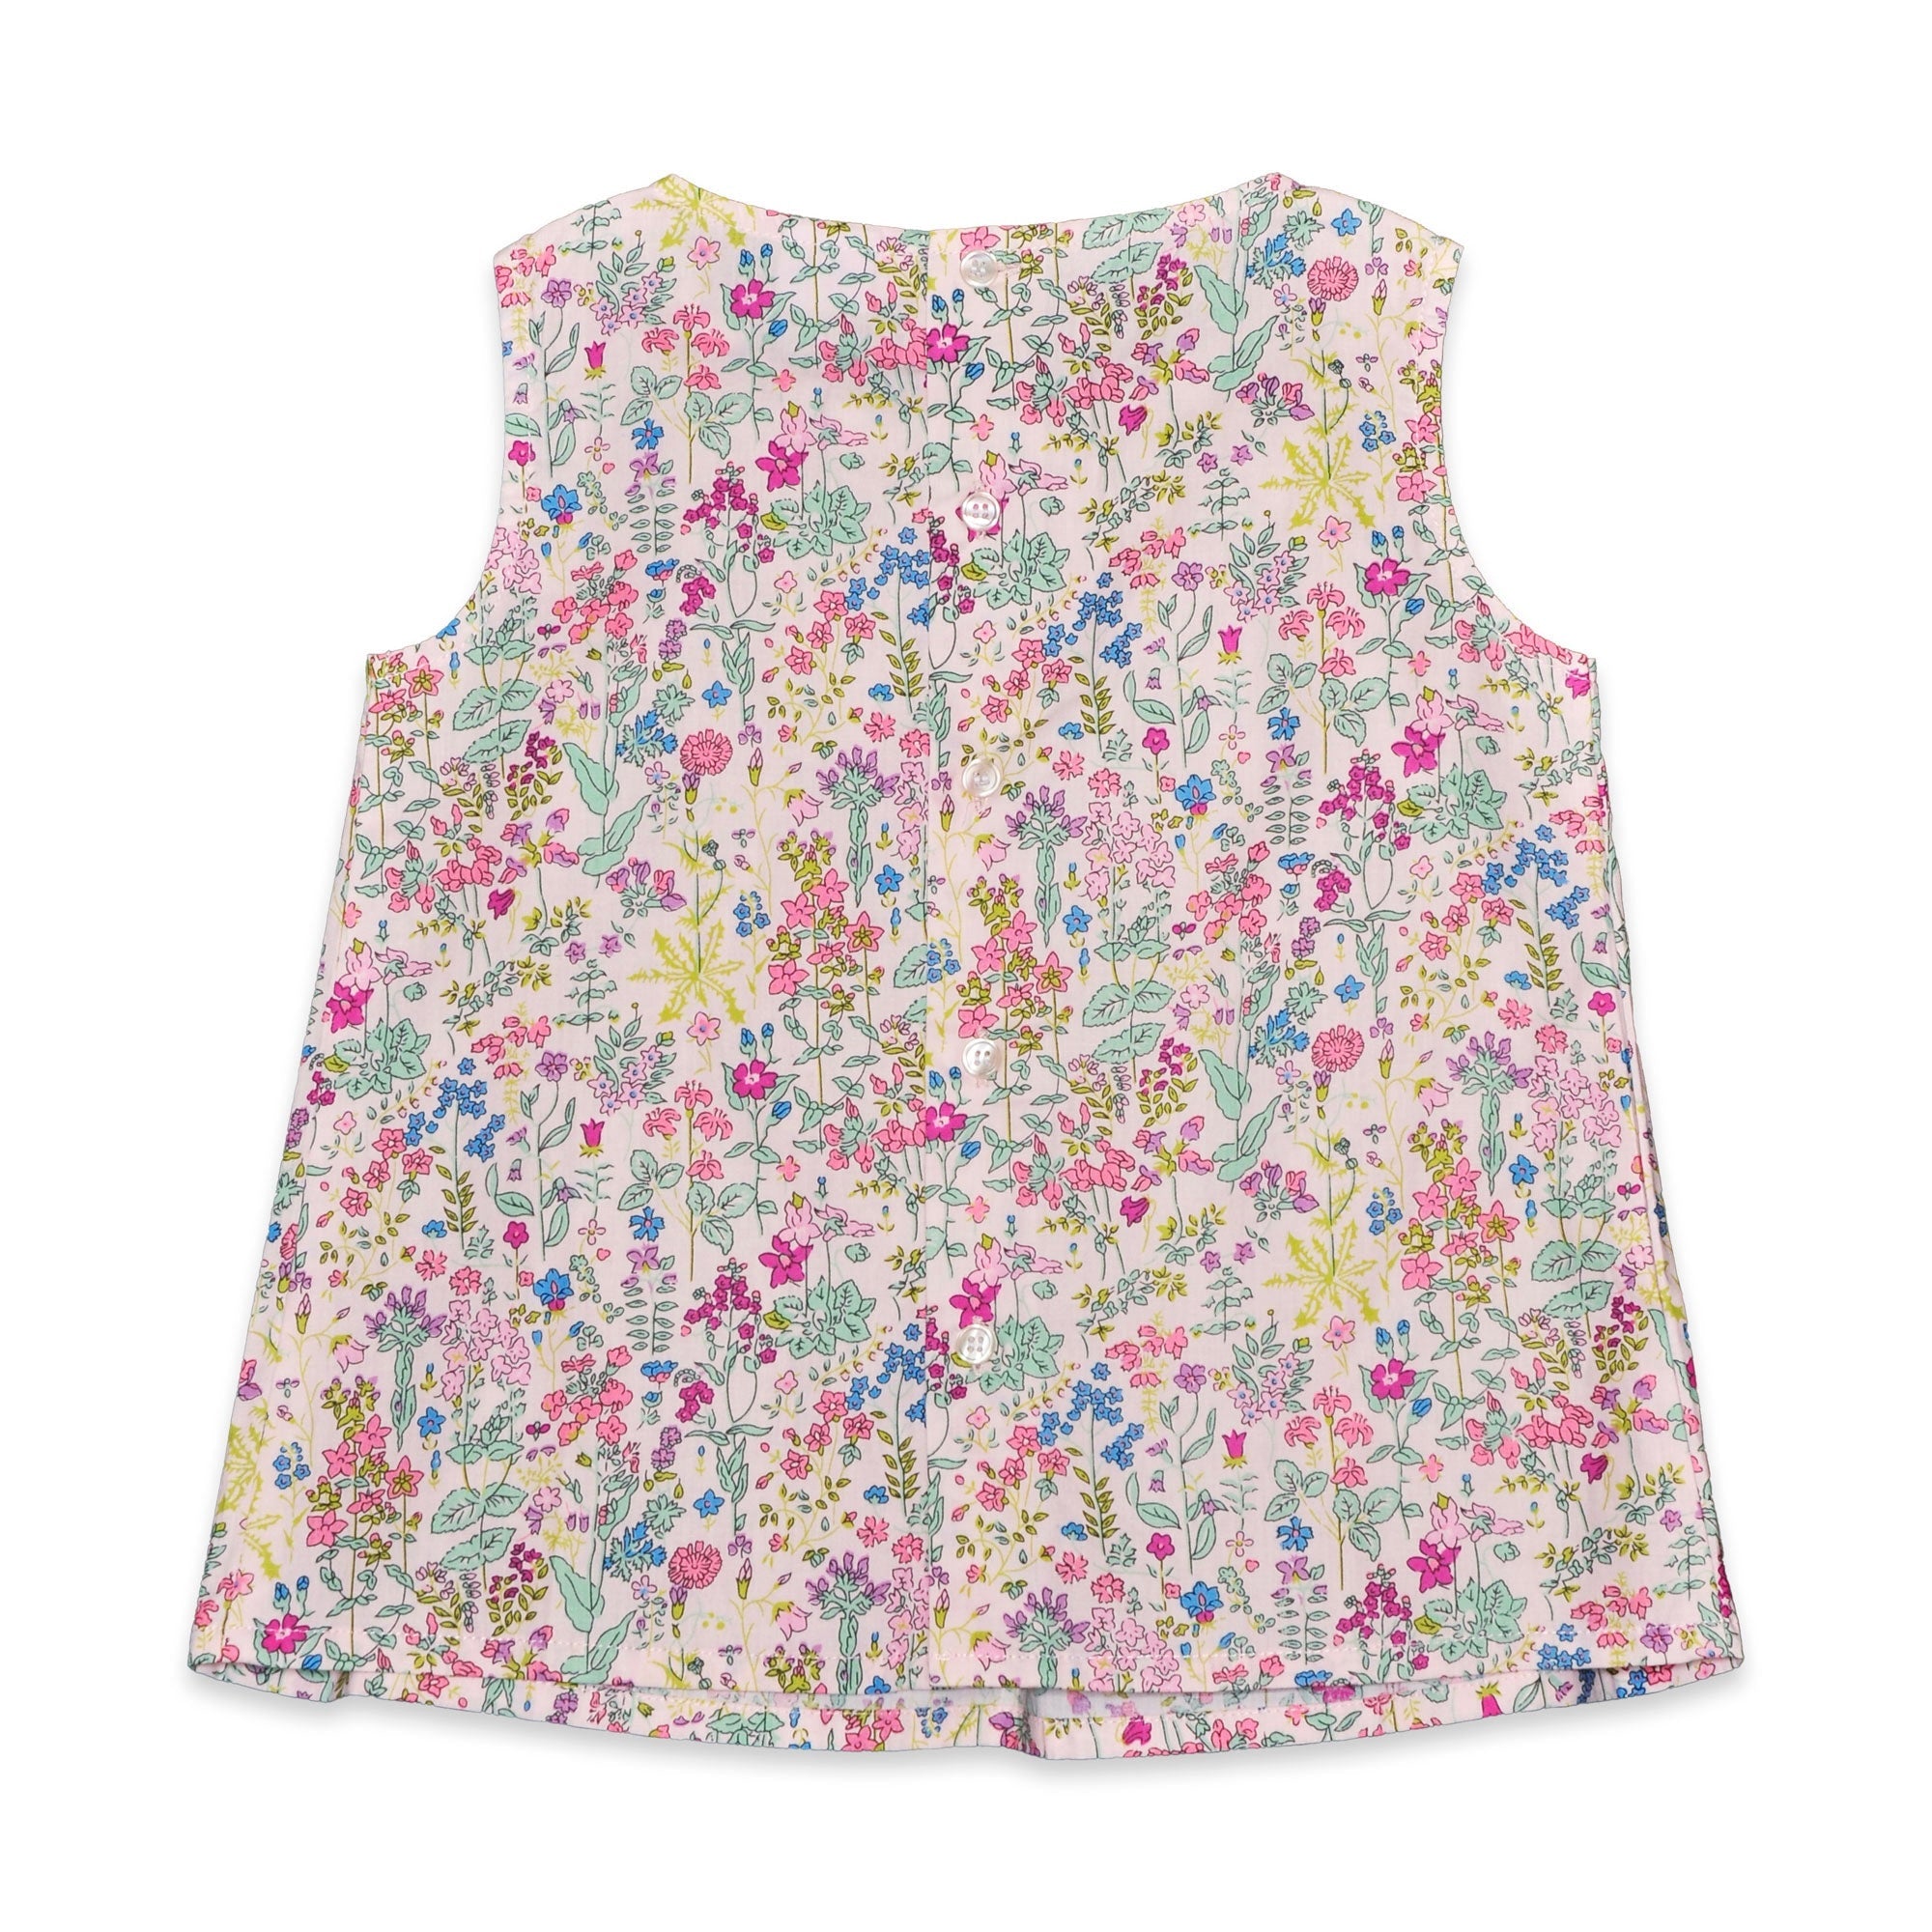 Florrie Tunic Top In Pale Pink Floral - Cou Cou Baby